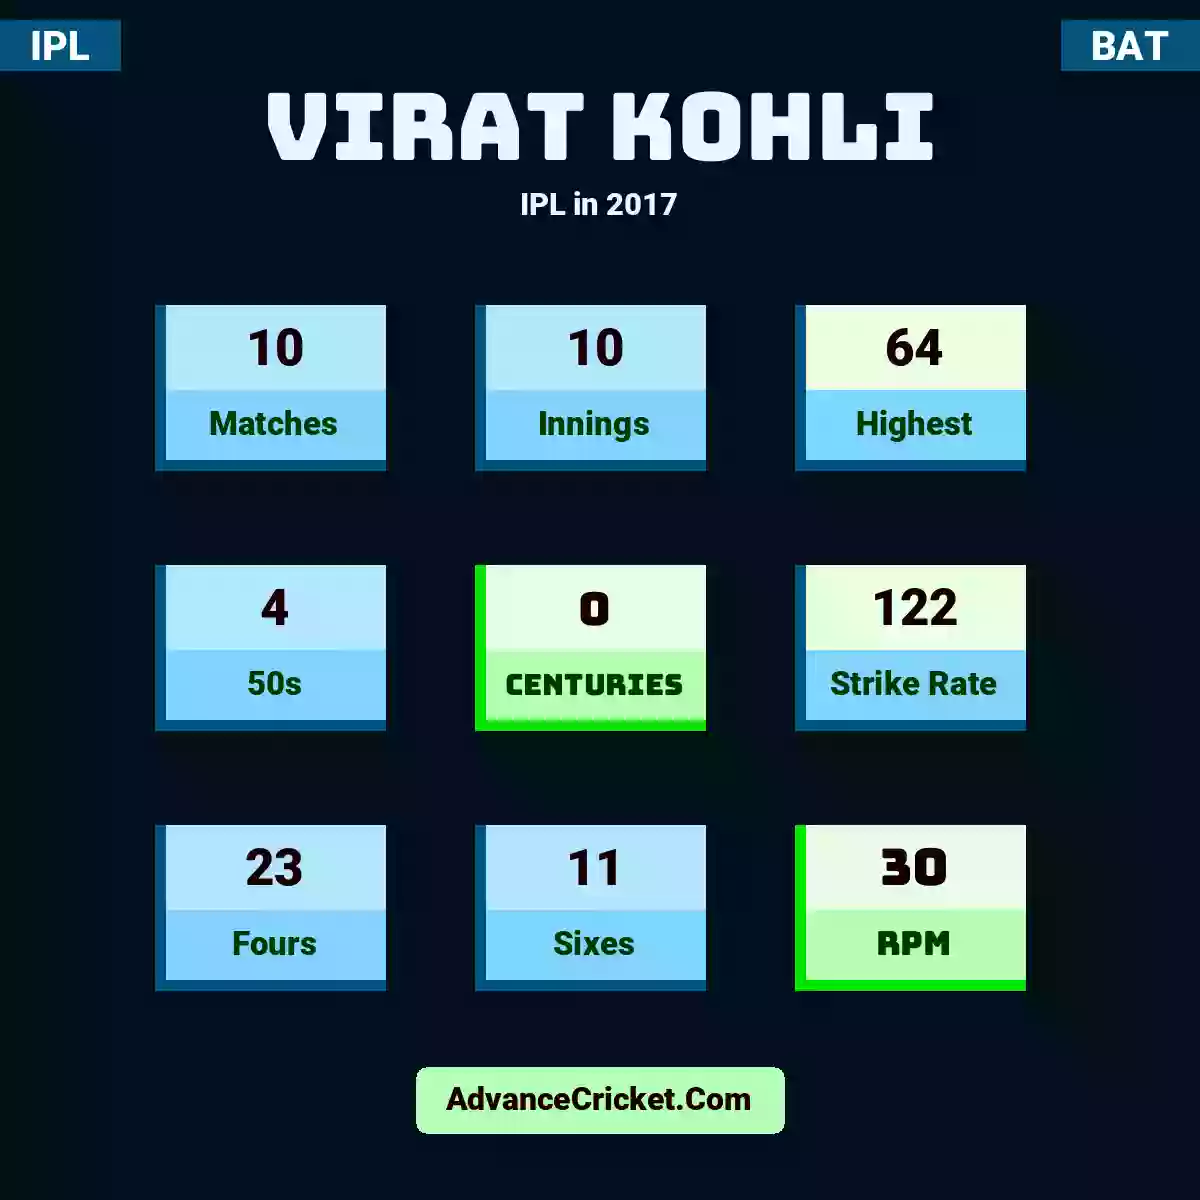 Virat Kohli IPL  in 2017, Virat Kohli played 10 matches, scored 64 runs as highest, 4 half-centuries, and 0 centuries, with a strike rate of 122. V.Kohli hit 23 fours and 11 sixes, with an RPM of 30.